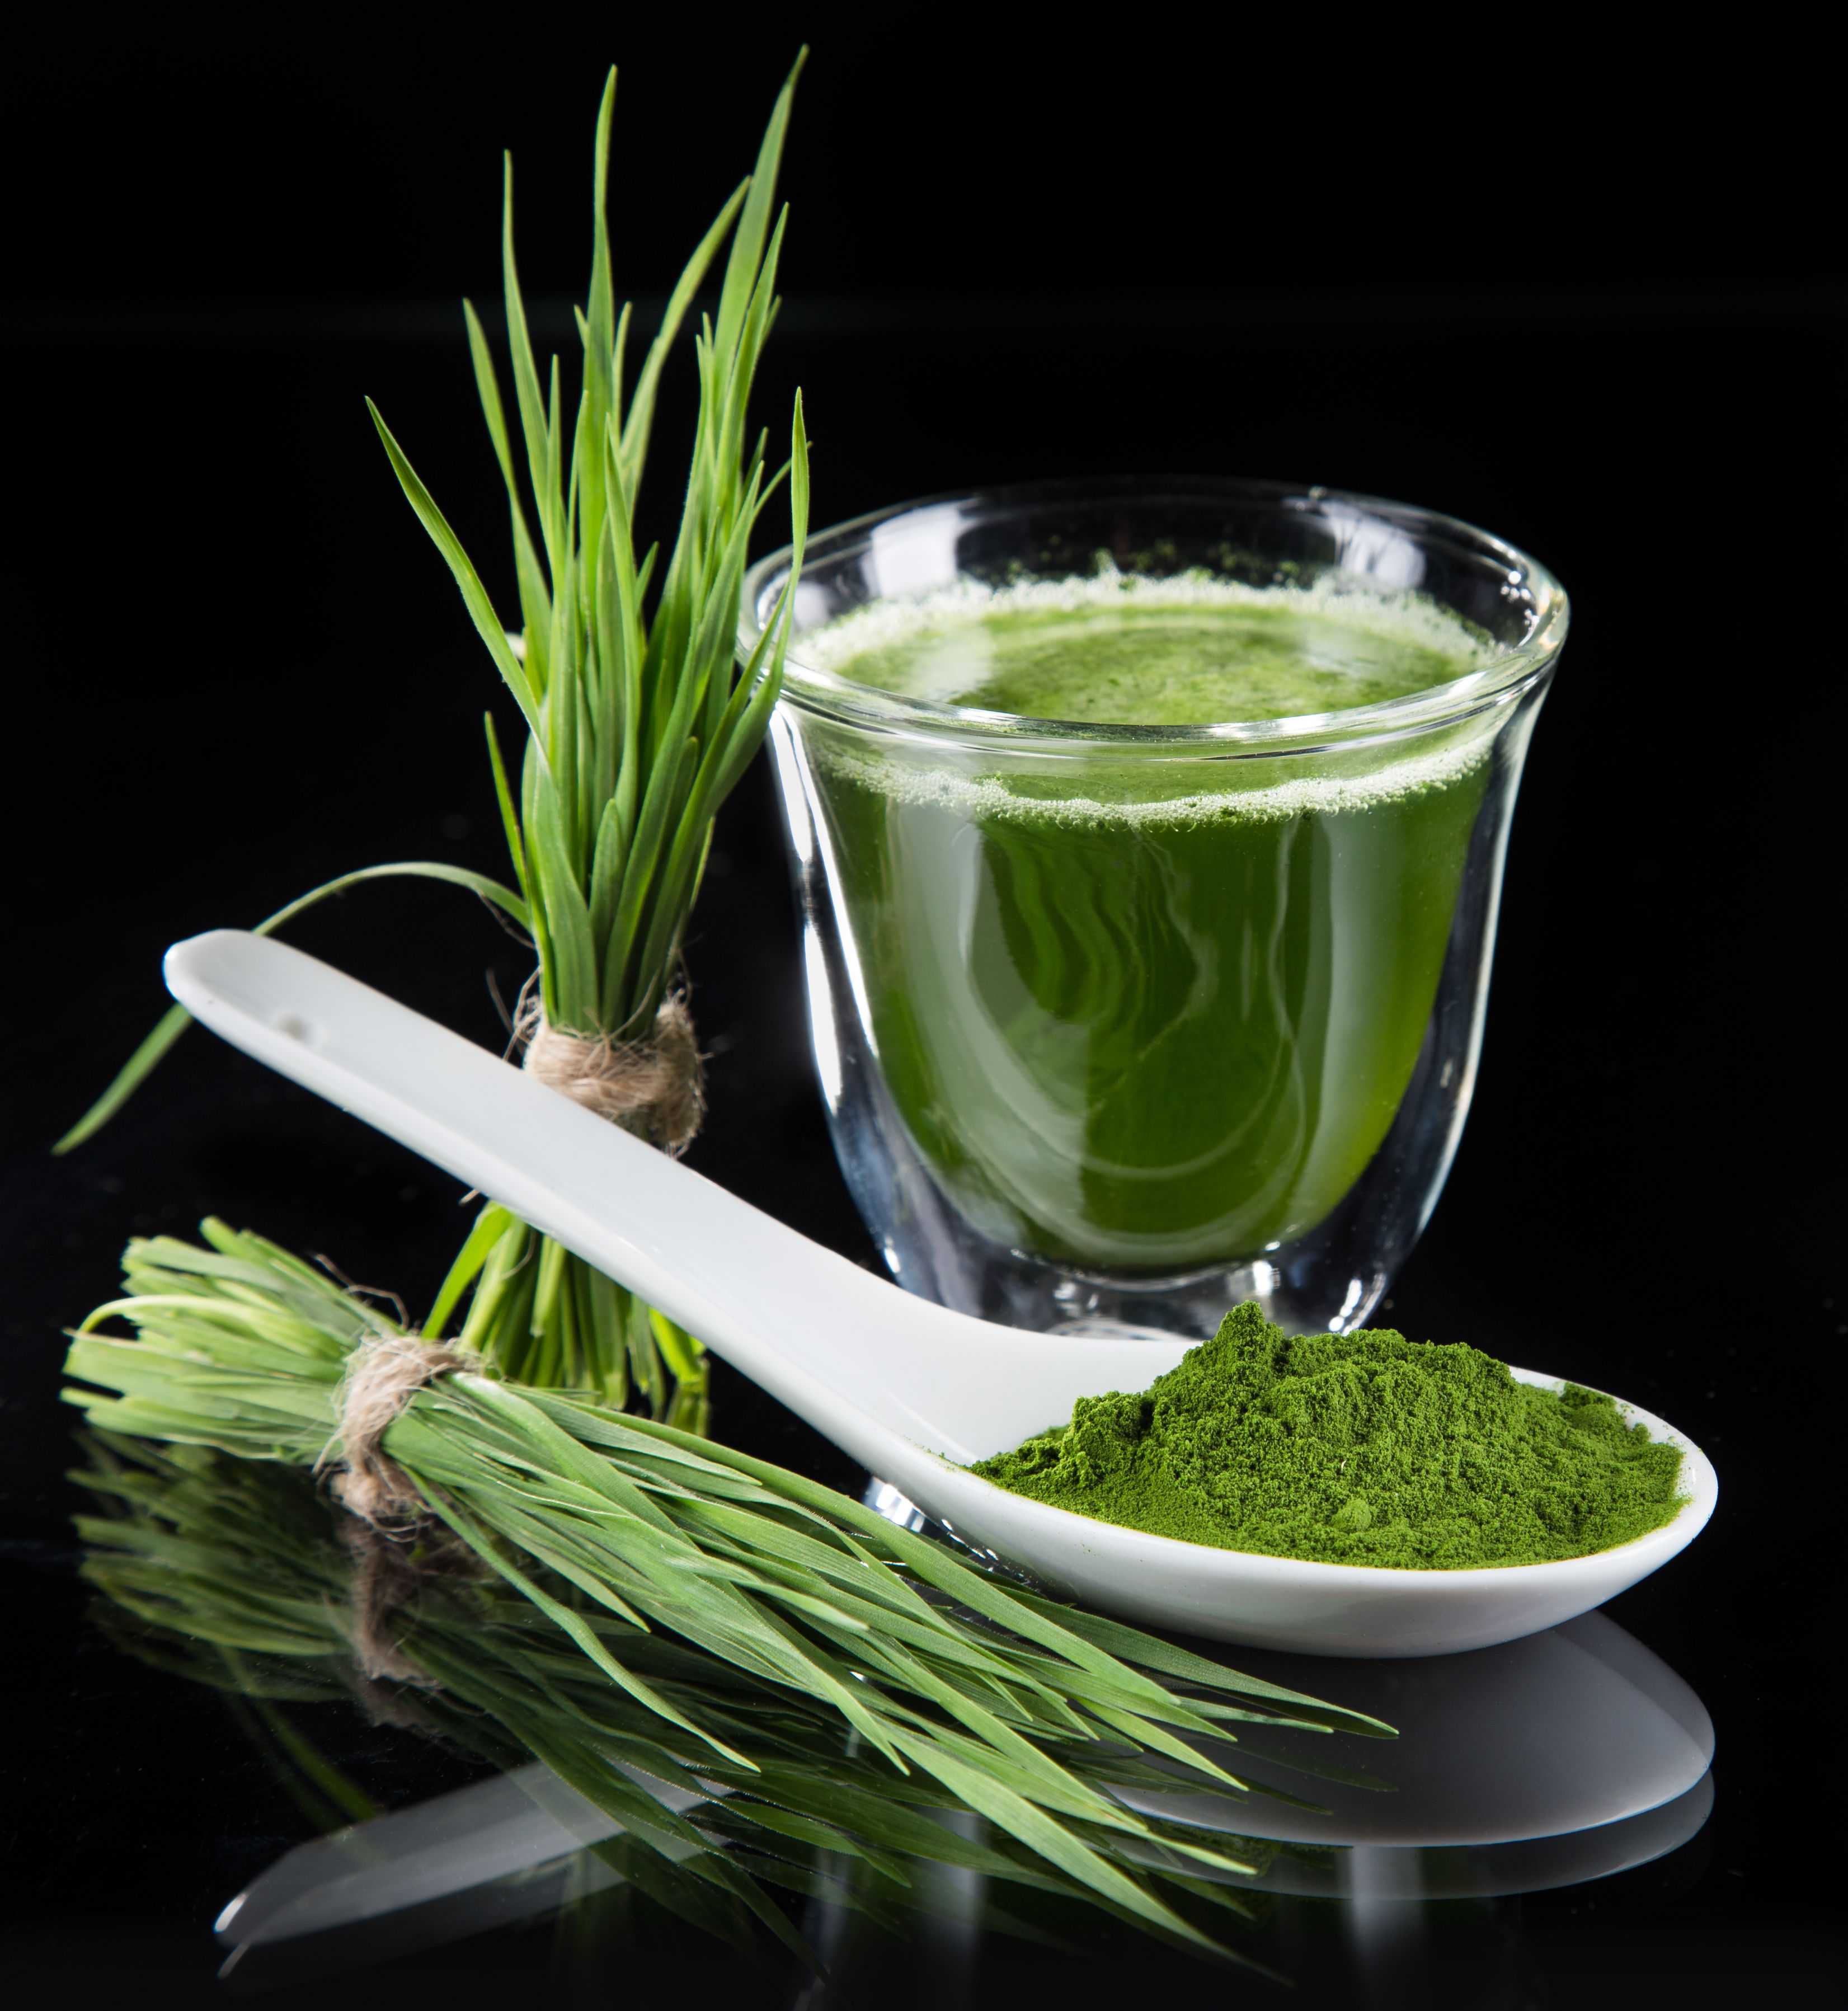 “Say Goodbye to Bland Meals: Spice Up Your Diet with Spirulina!”